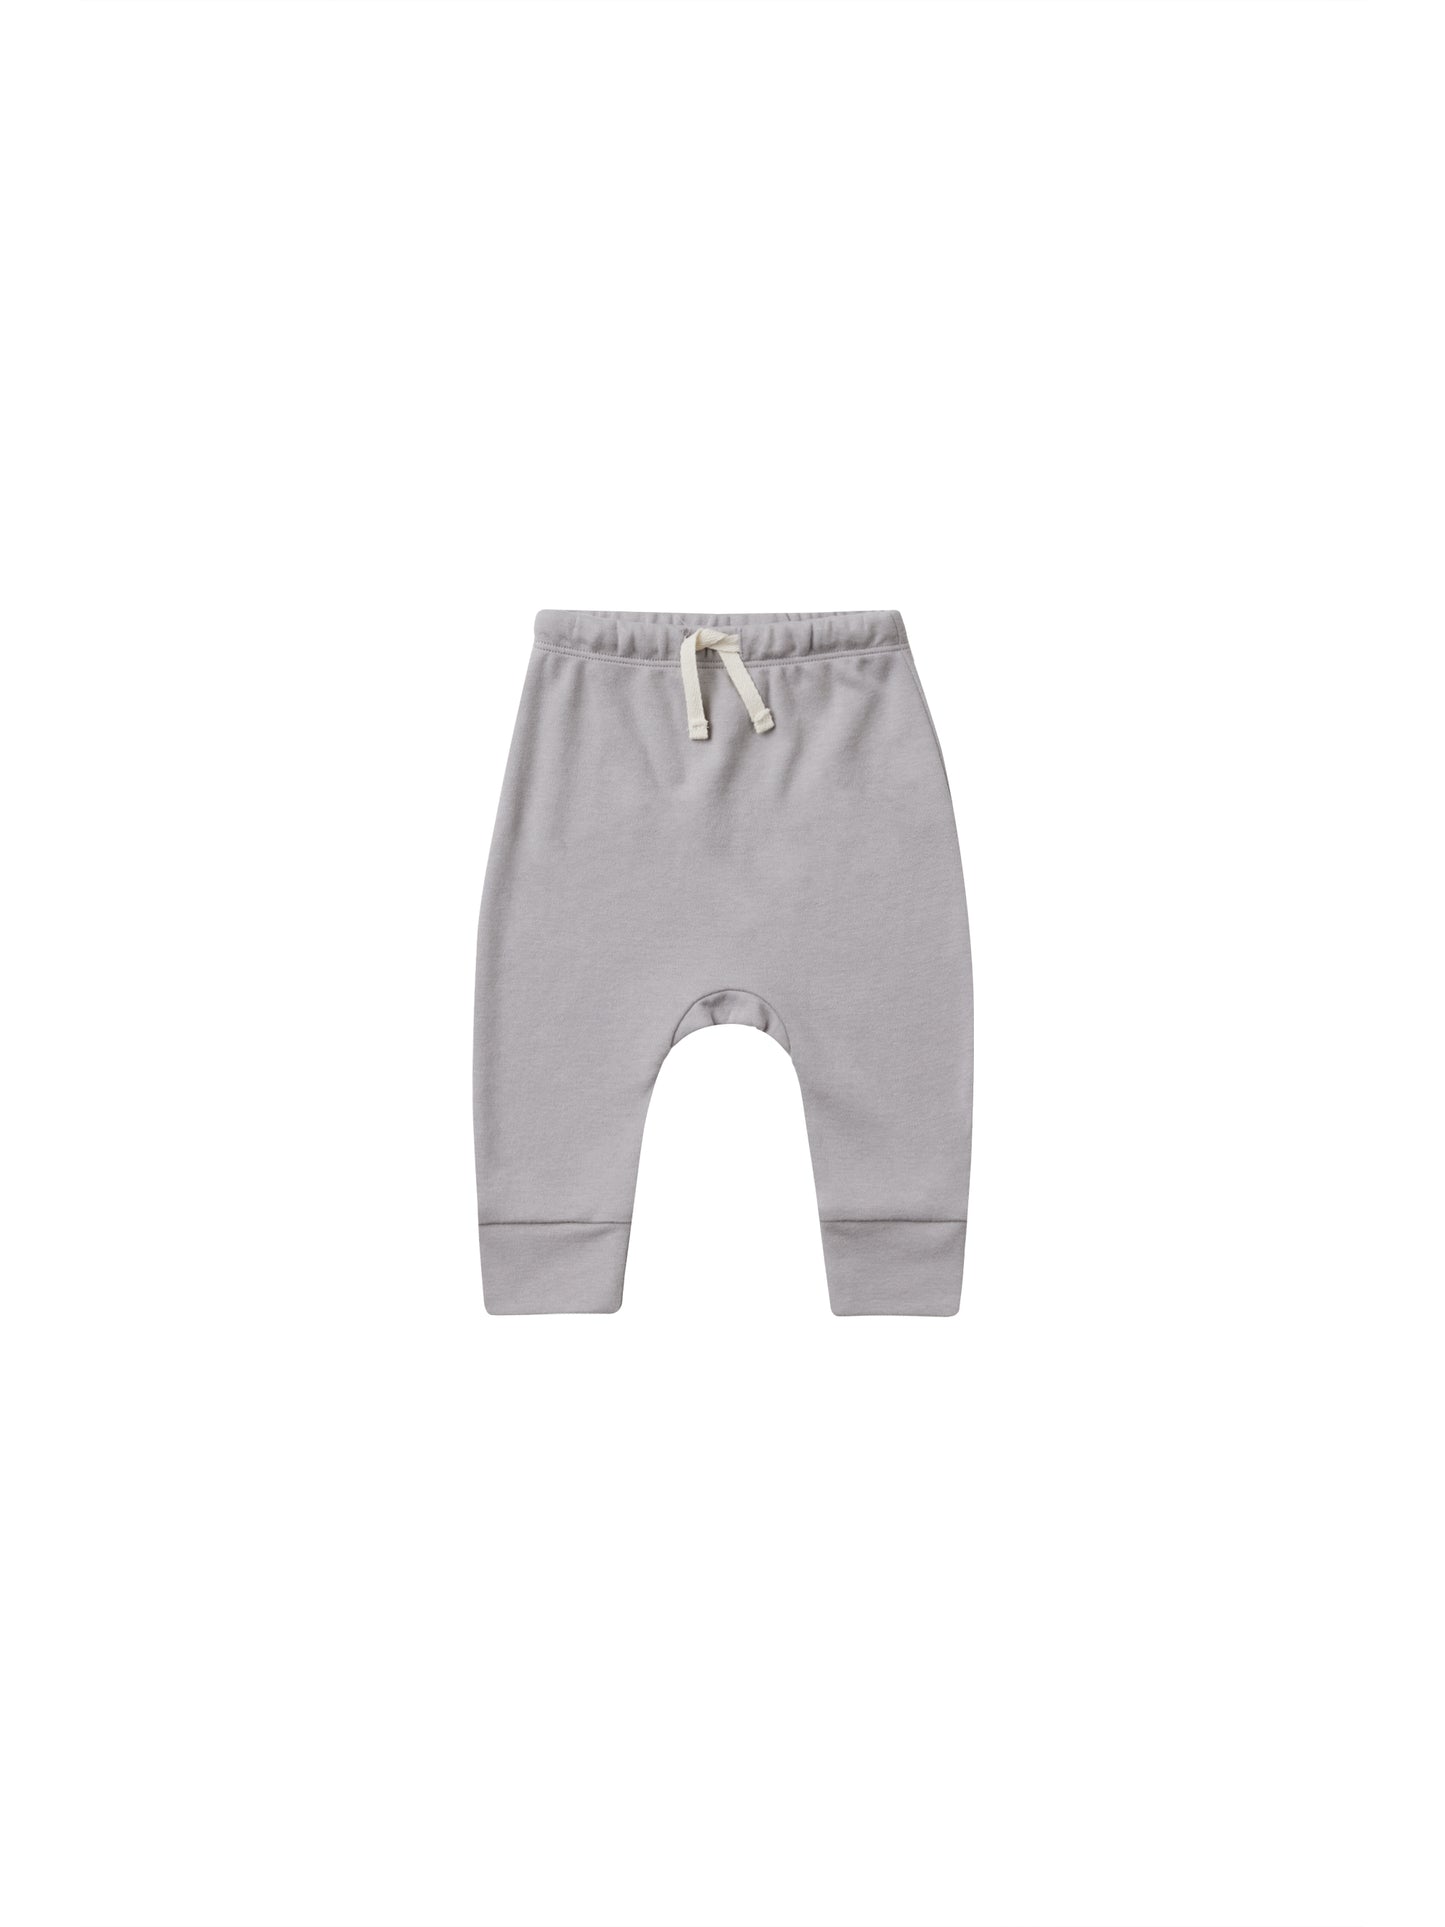 Quincy Mae - Drawstring Pant - Periwinkle